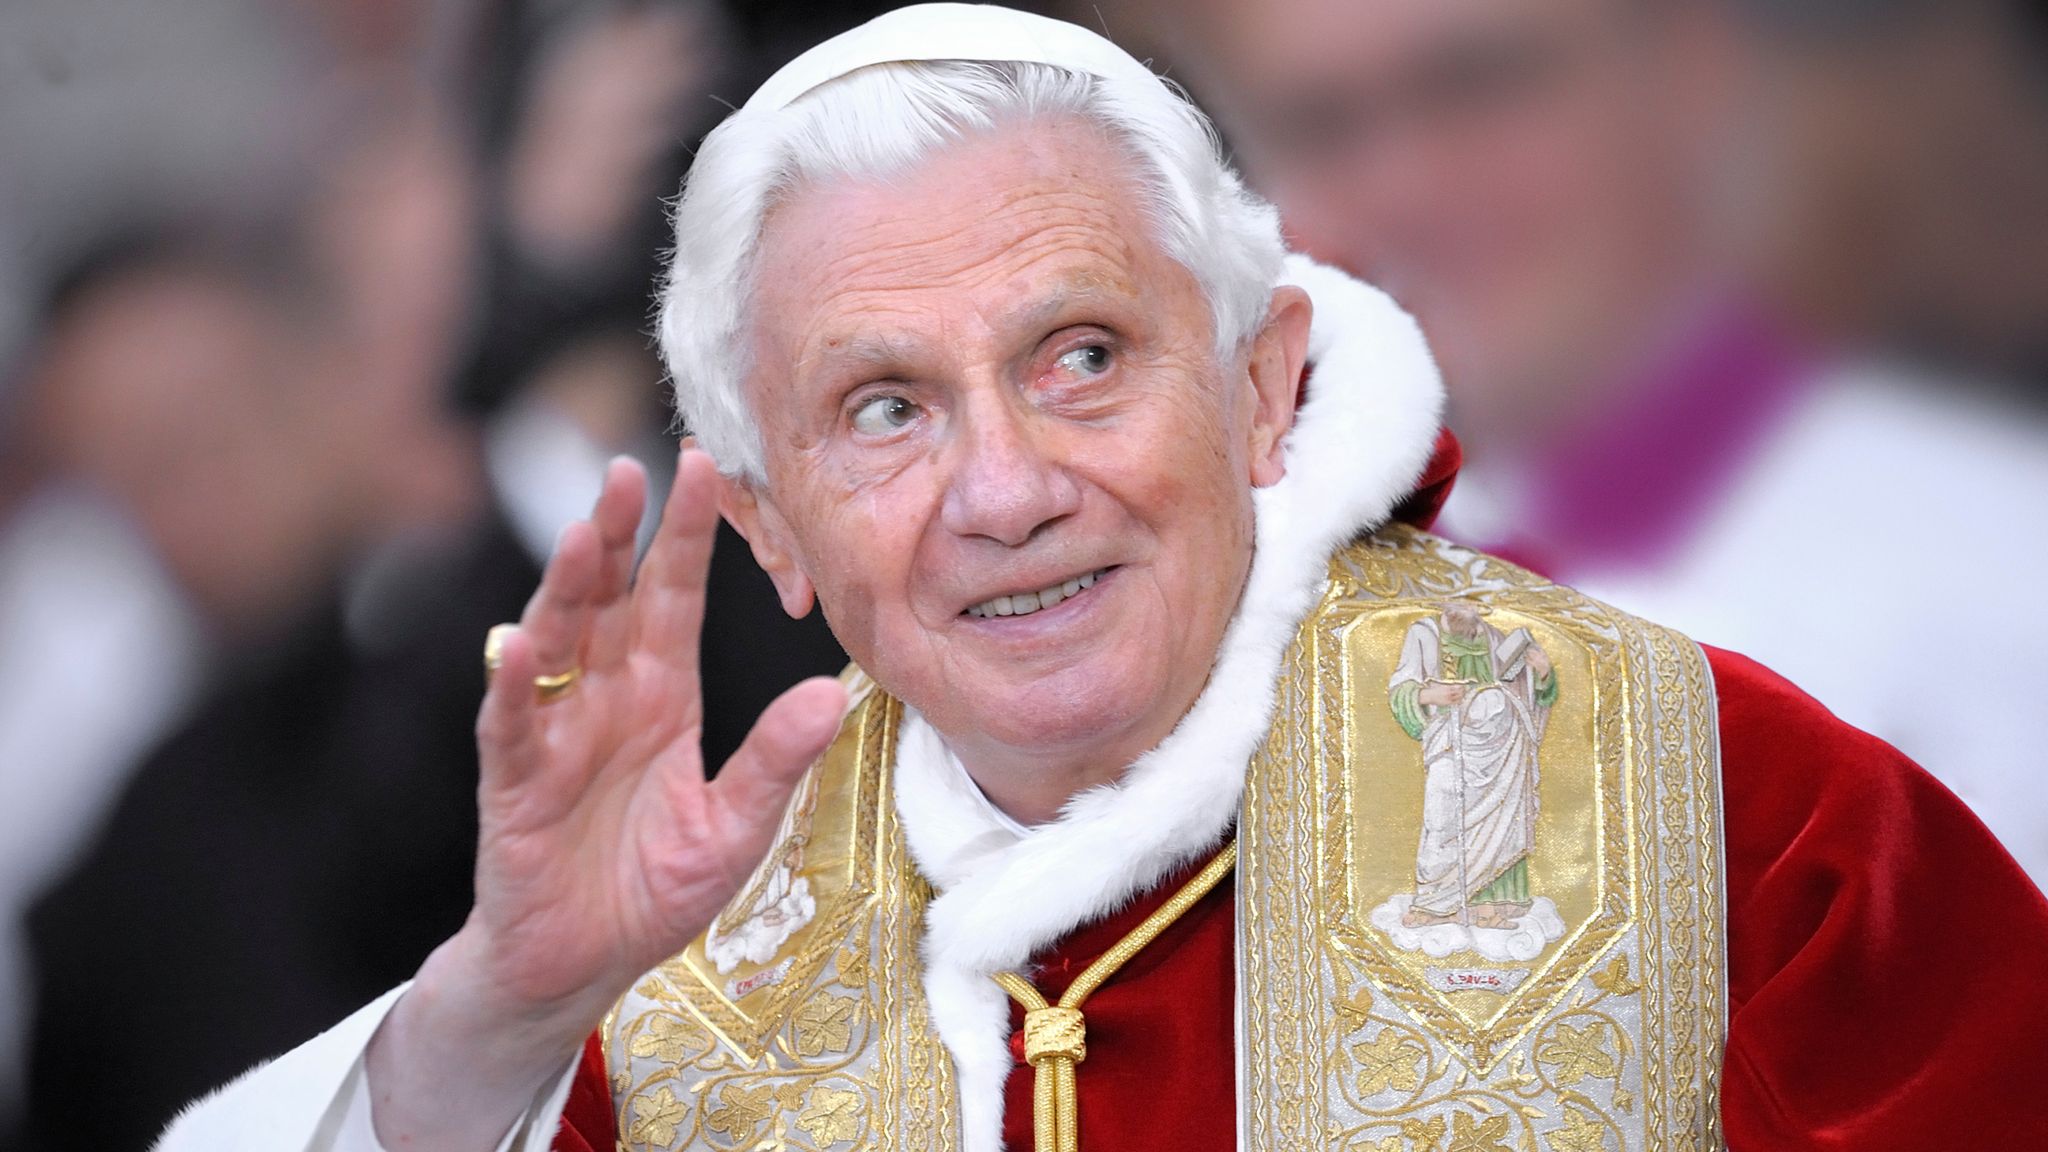 Pope Benedict XVI, the first to resign in centuries, dies aged 95 | World News Sky News